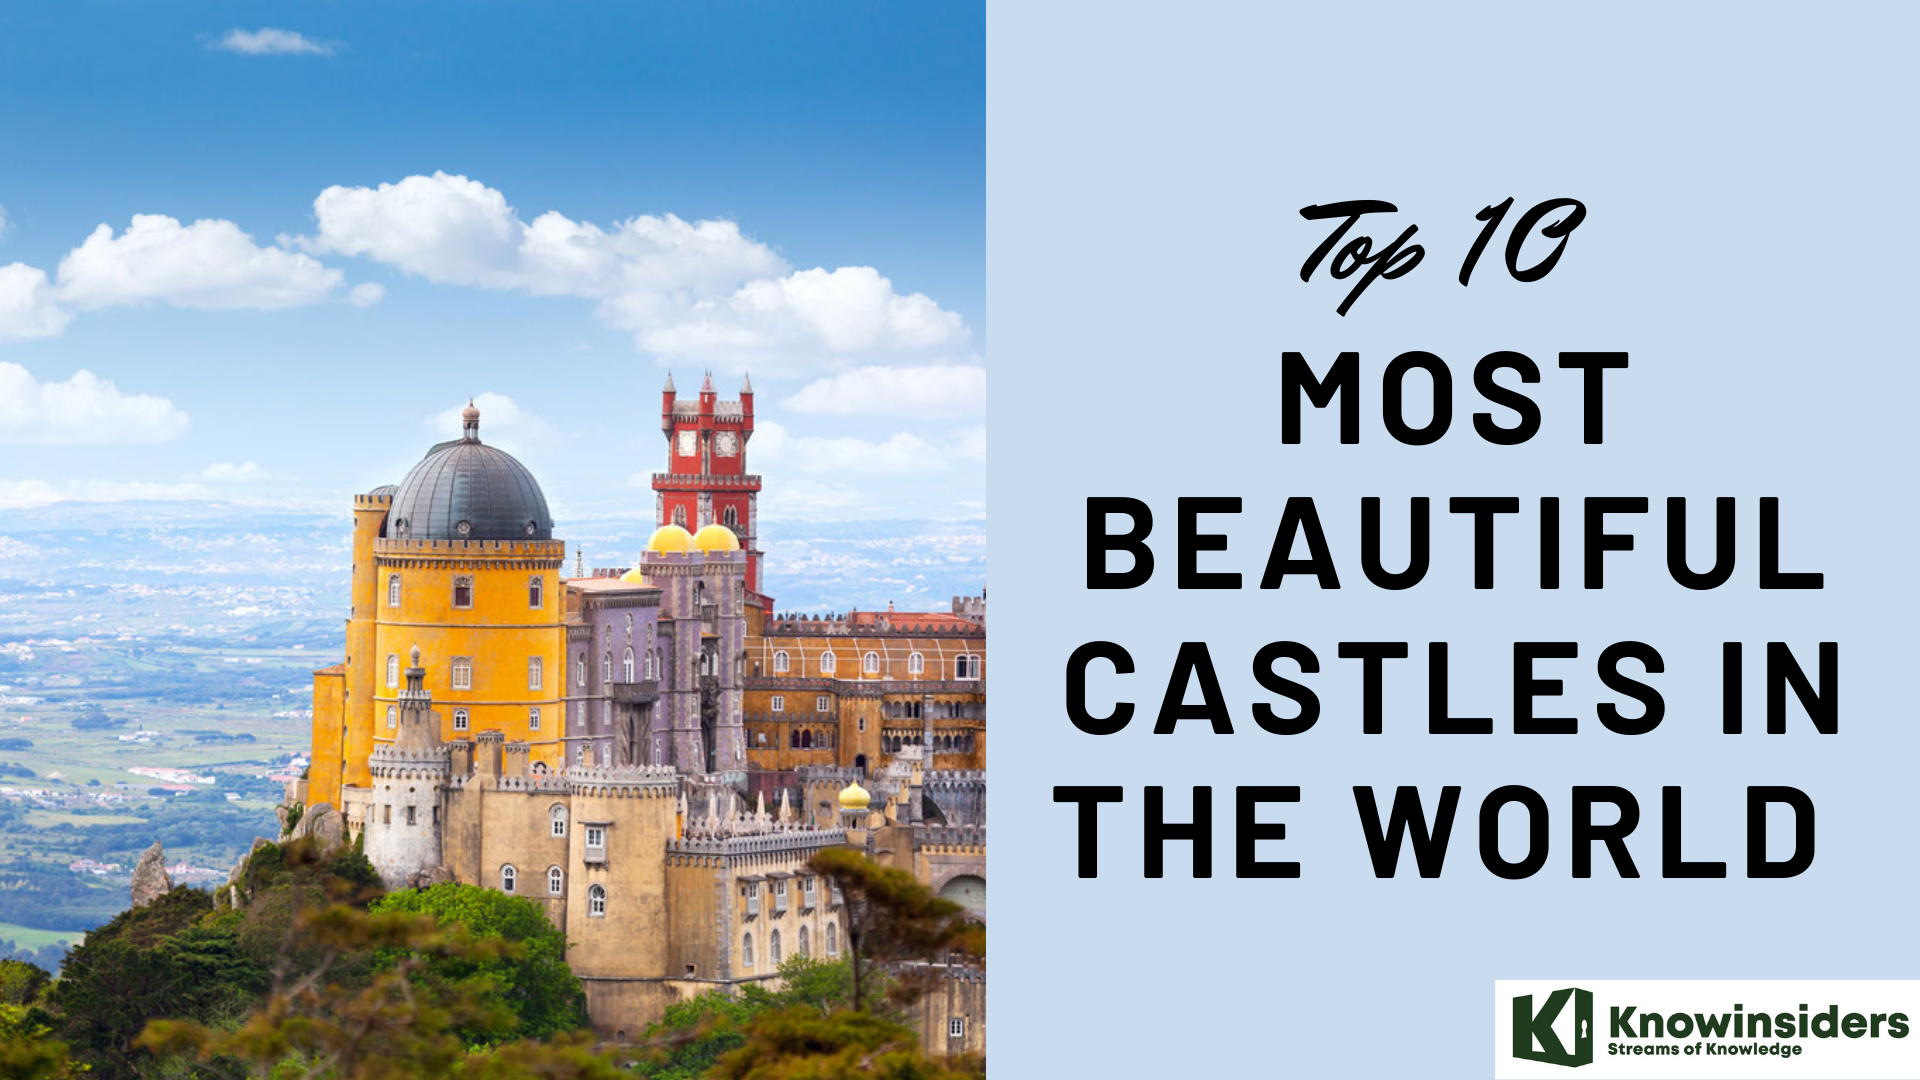 Top 10 most beautiful castles in the world 